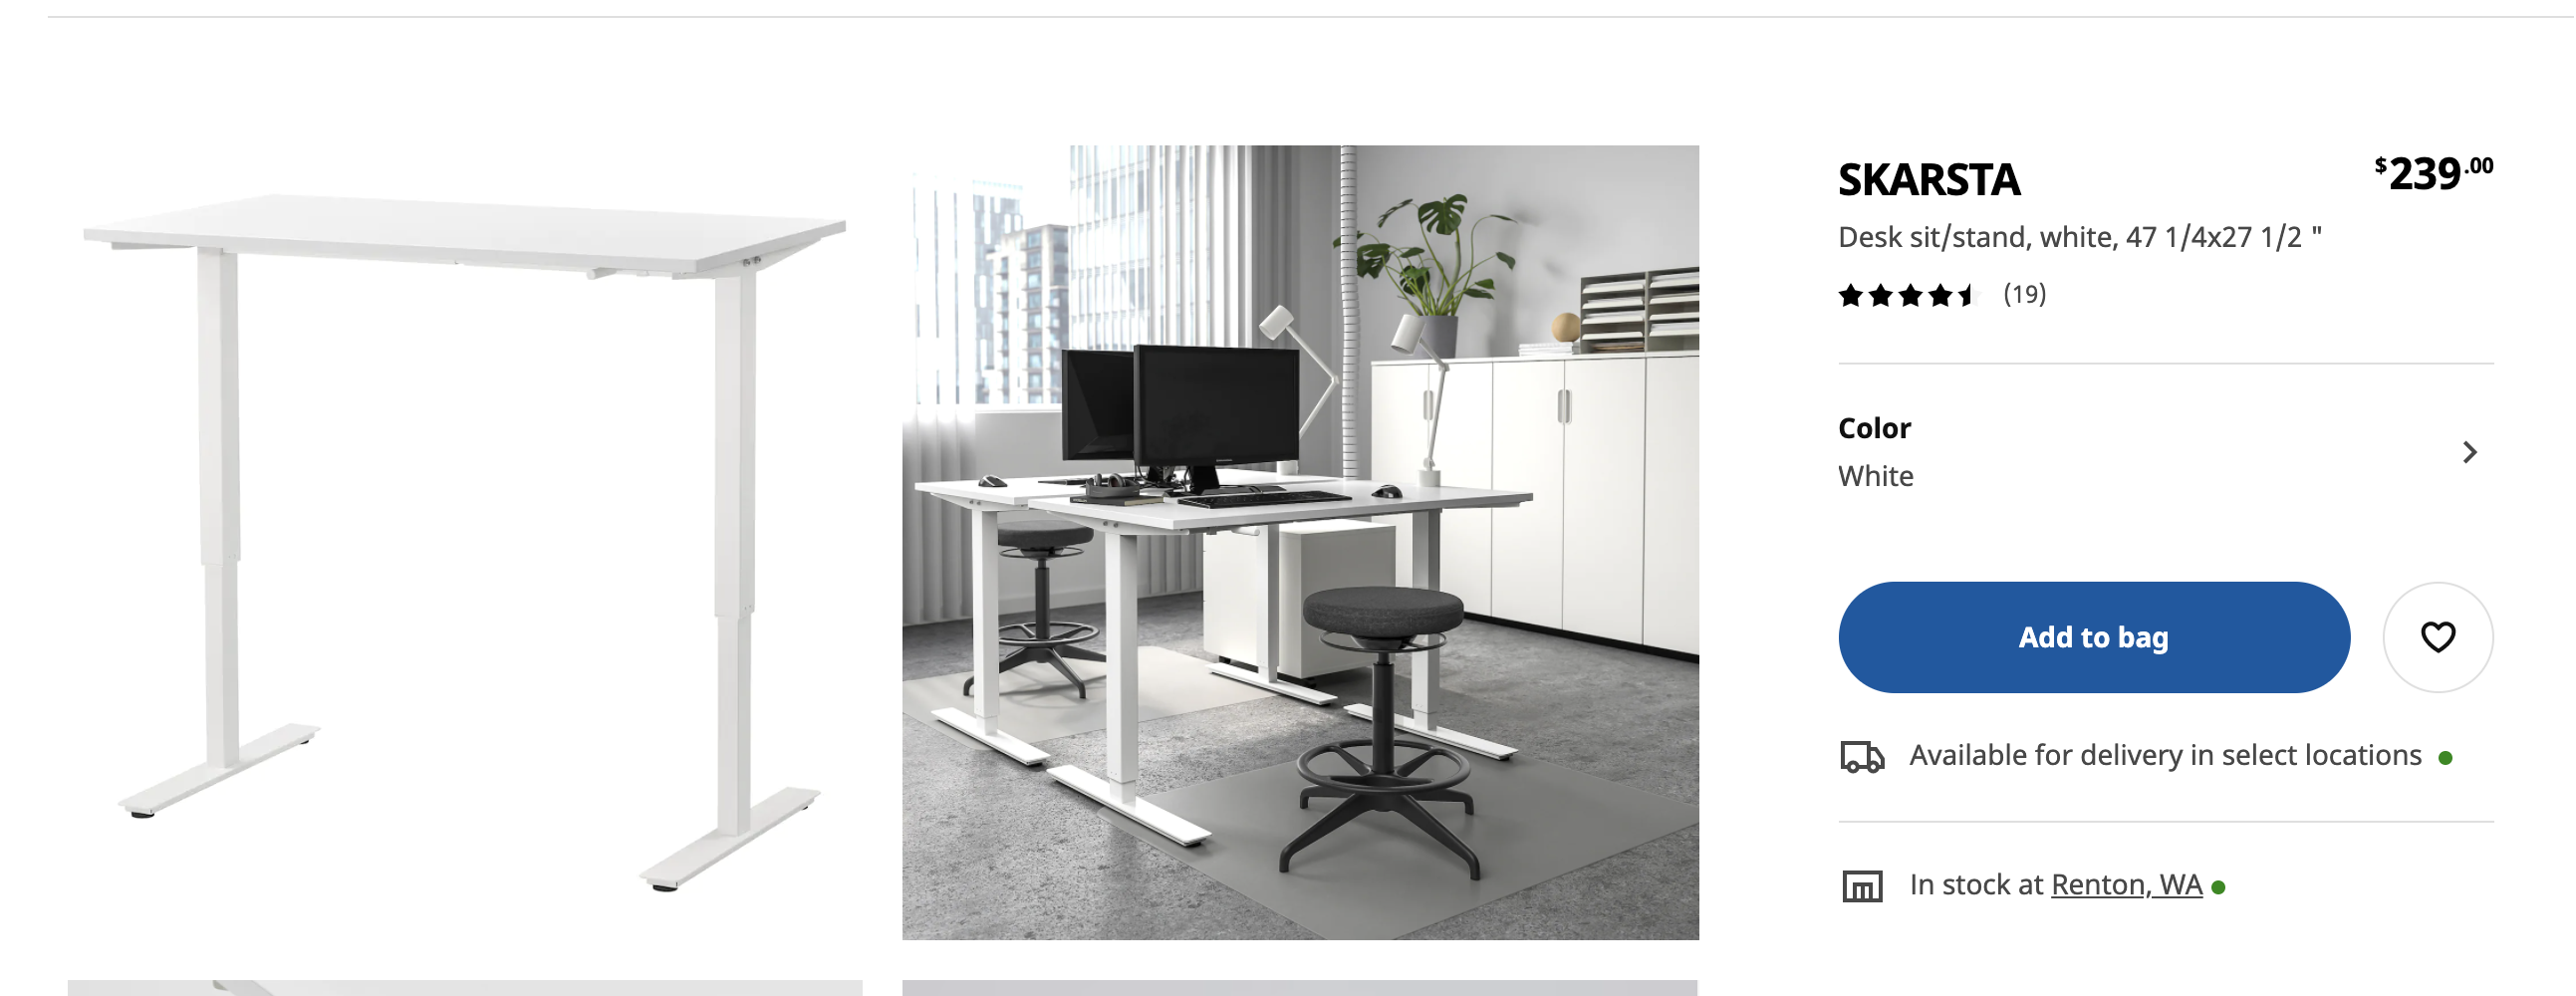 SKARSTA  Desk sit/stand, white, 47 1/4x27 1/2 "  (19)  Color  White  Add to bag  $239•00  Available for delivery in select locations  In stock at Renton, WA •